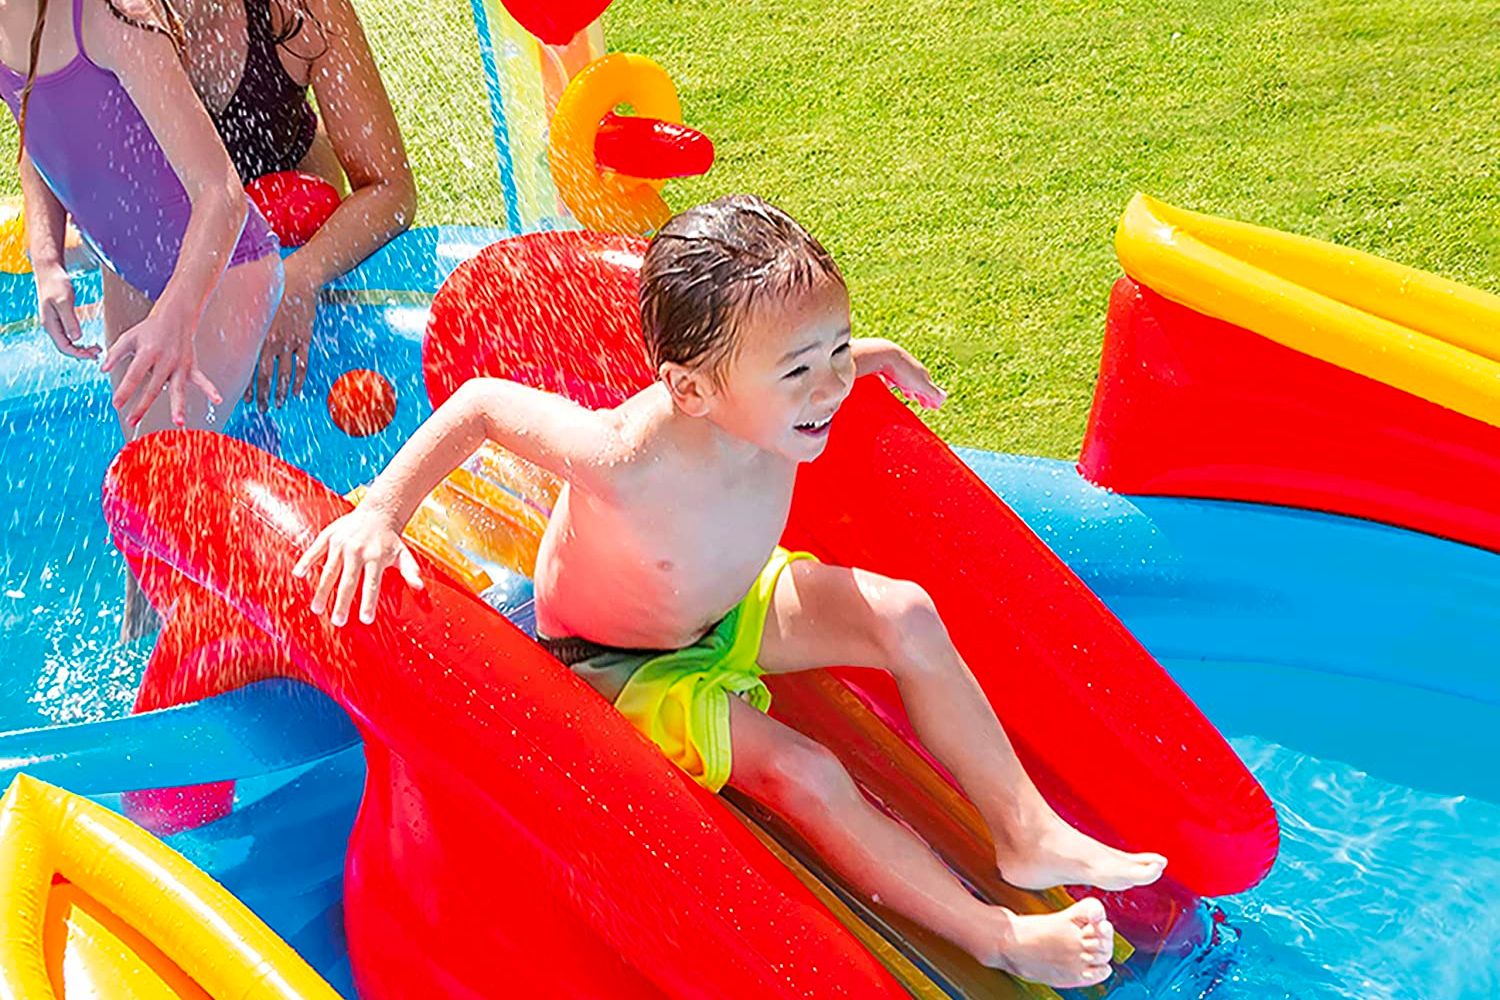 A young boy going down a slide on the best above-ground pool option